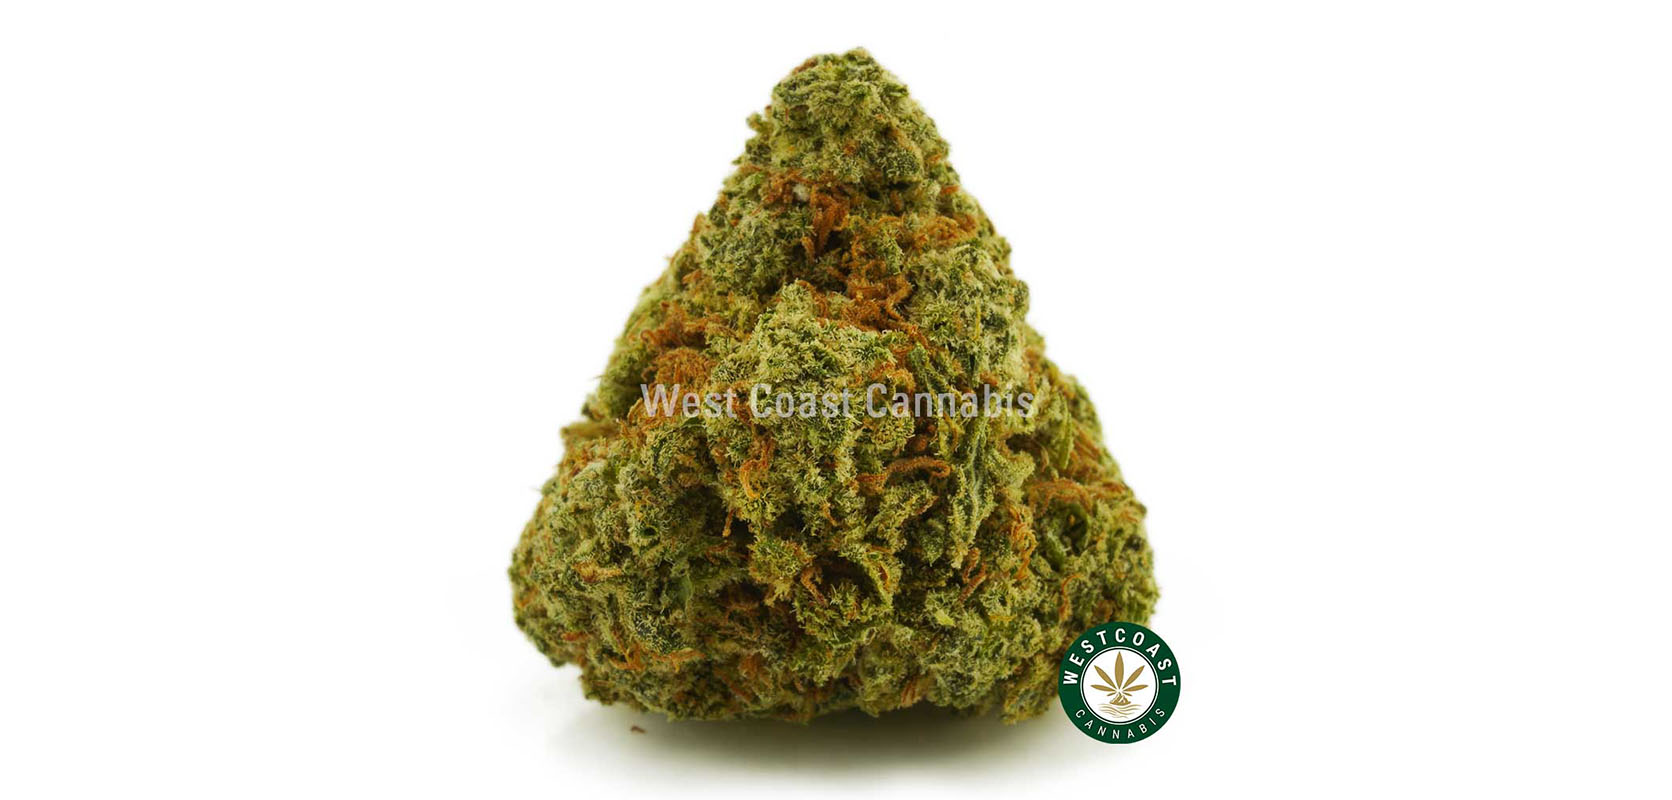 image of Lemon Kush Strain weed for sale from low price bud. Online dispensary for mail order marijuana in Canada. Buy weed online.